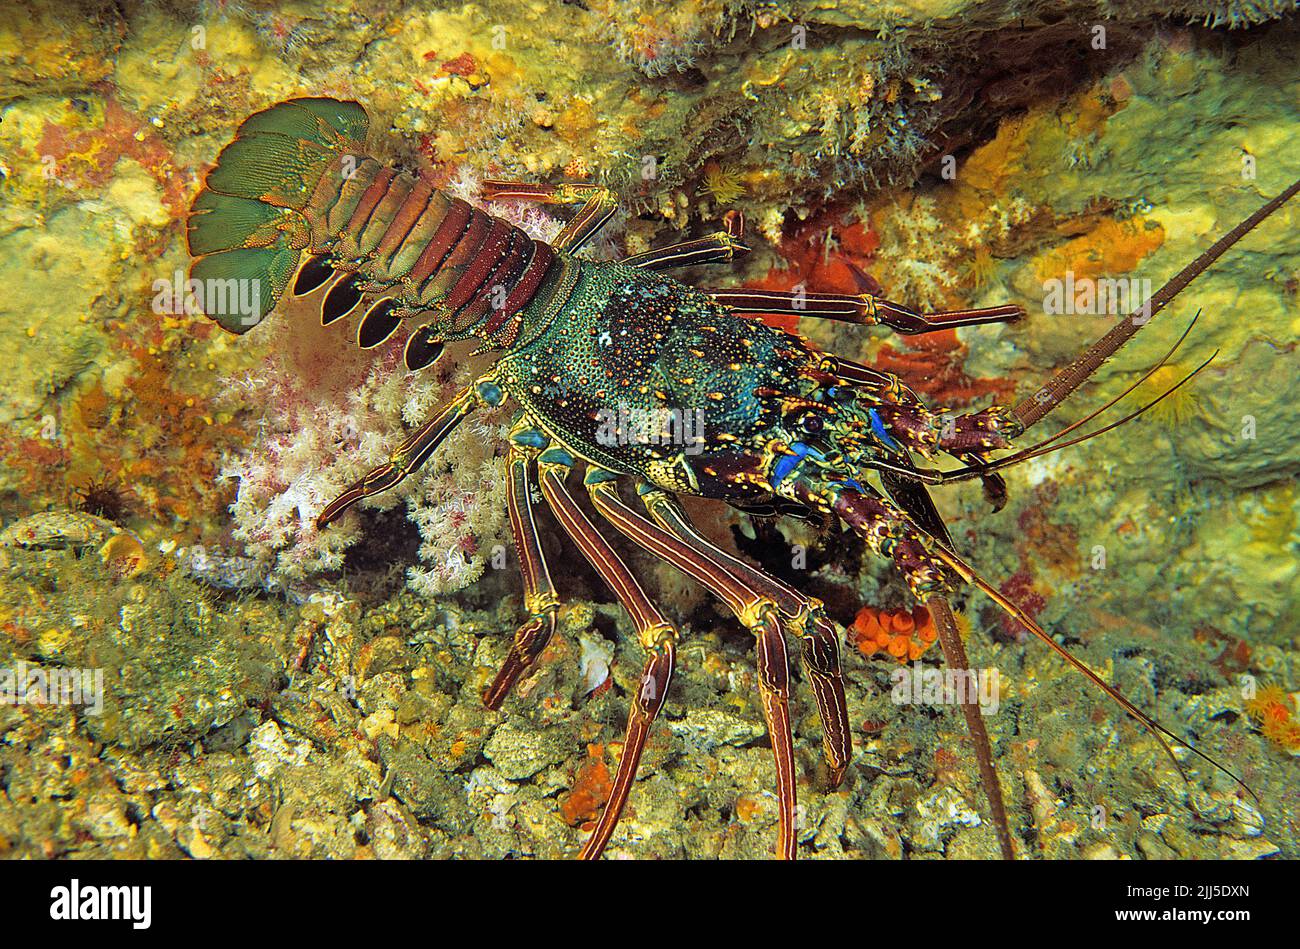 Tiger Lobster or Ornate Spiny Lobster (Panulirus ornatus) in a coral reef, Myanmar, Andaman Sea, Asia Stock Photo